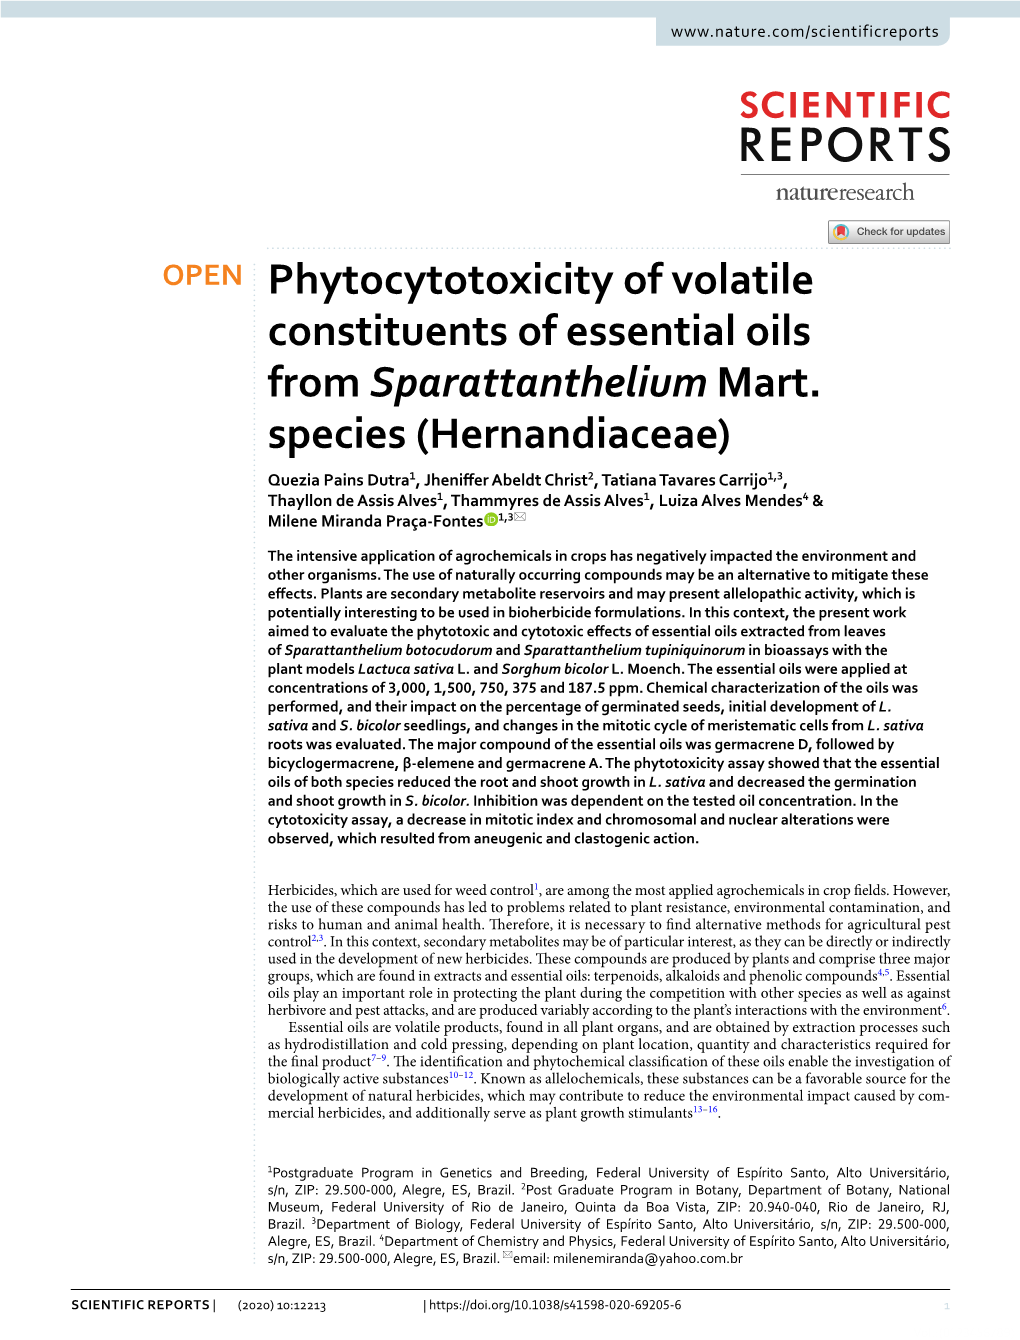 Phytocytotoxicity of Volatile Constituents of Essential Oils from Sparattanthelium Mart